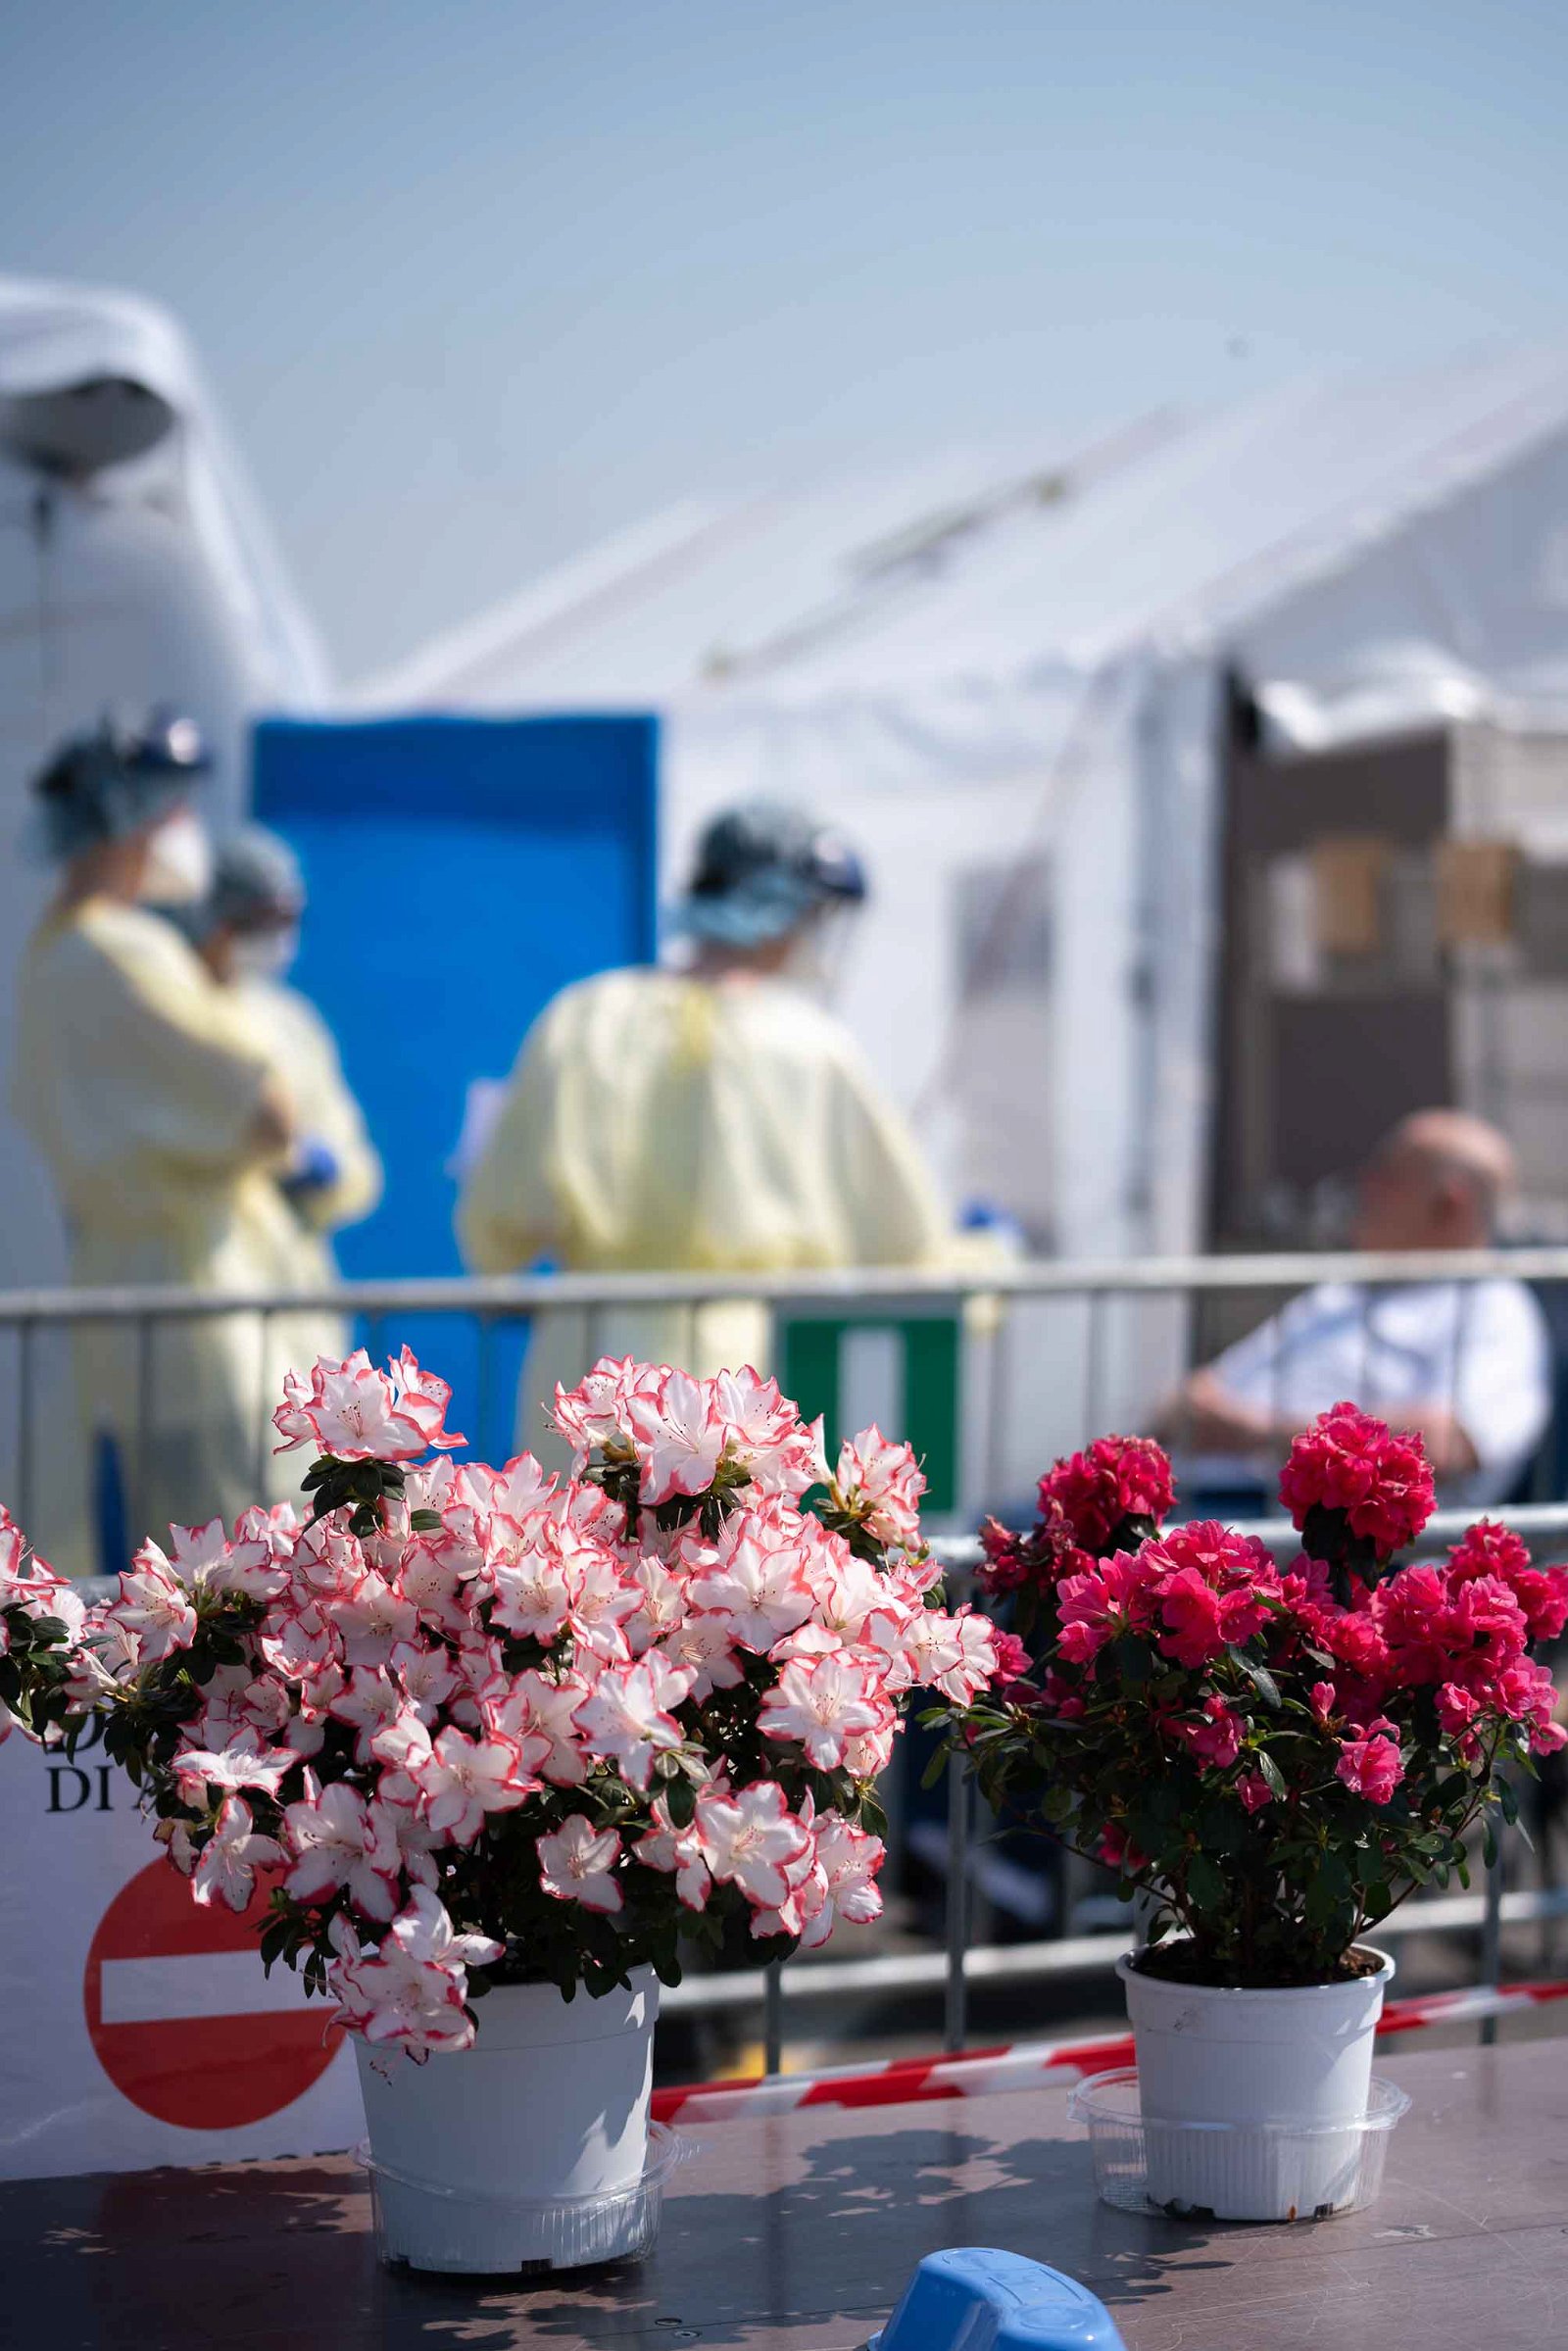 Donated flowers brightened spirits at the SP field hospital in Cremona, Italy during Easter week.